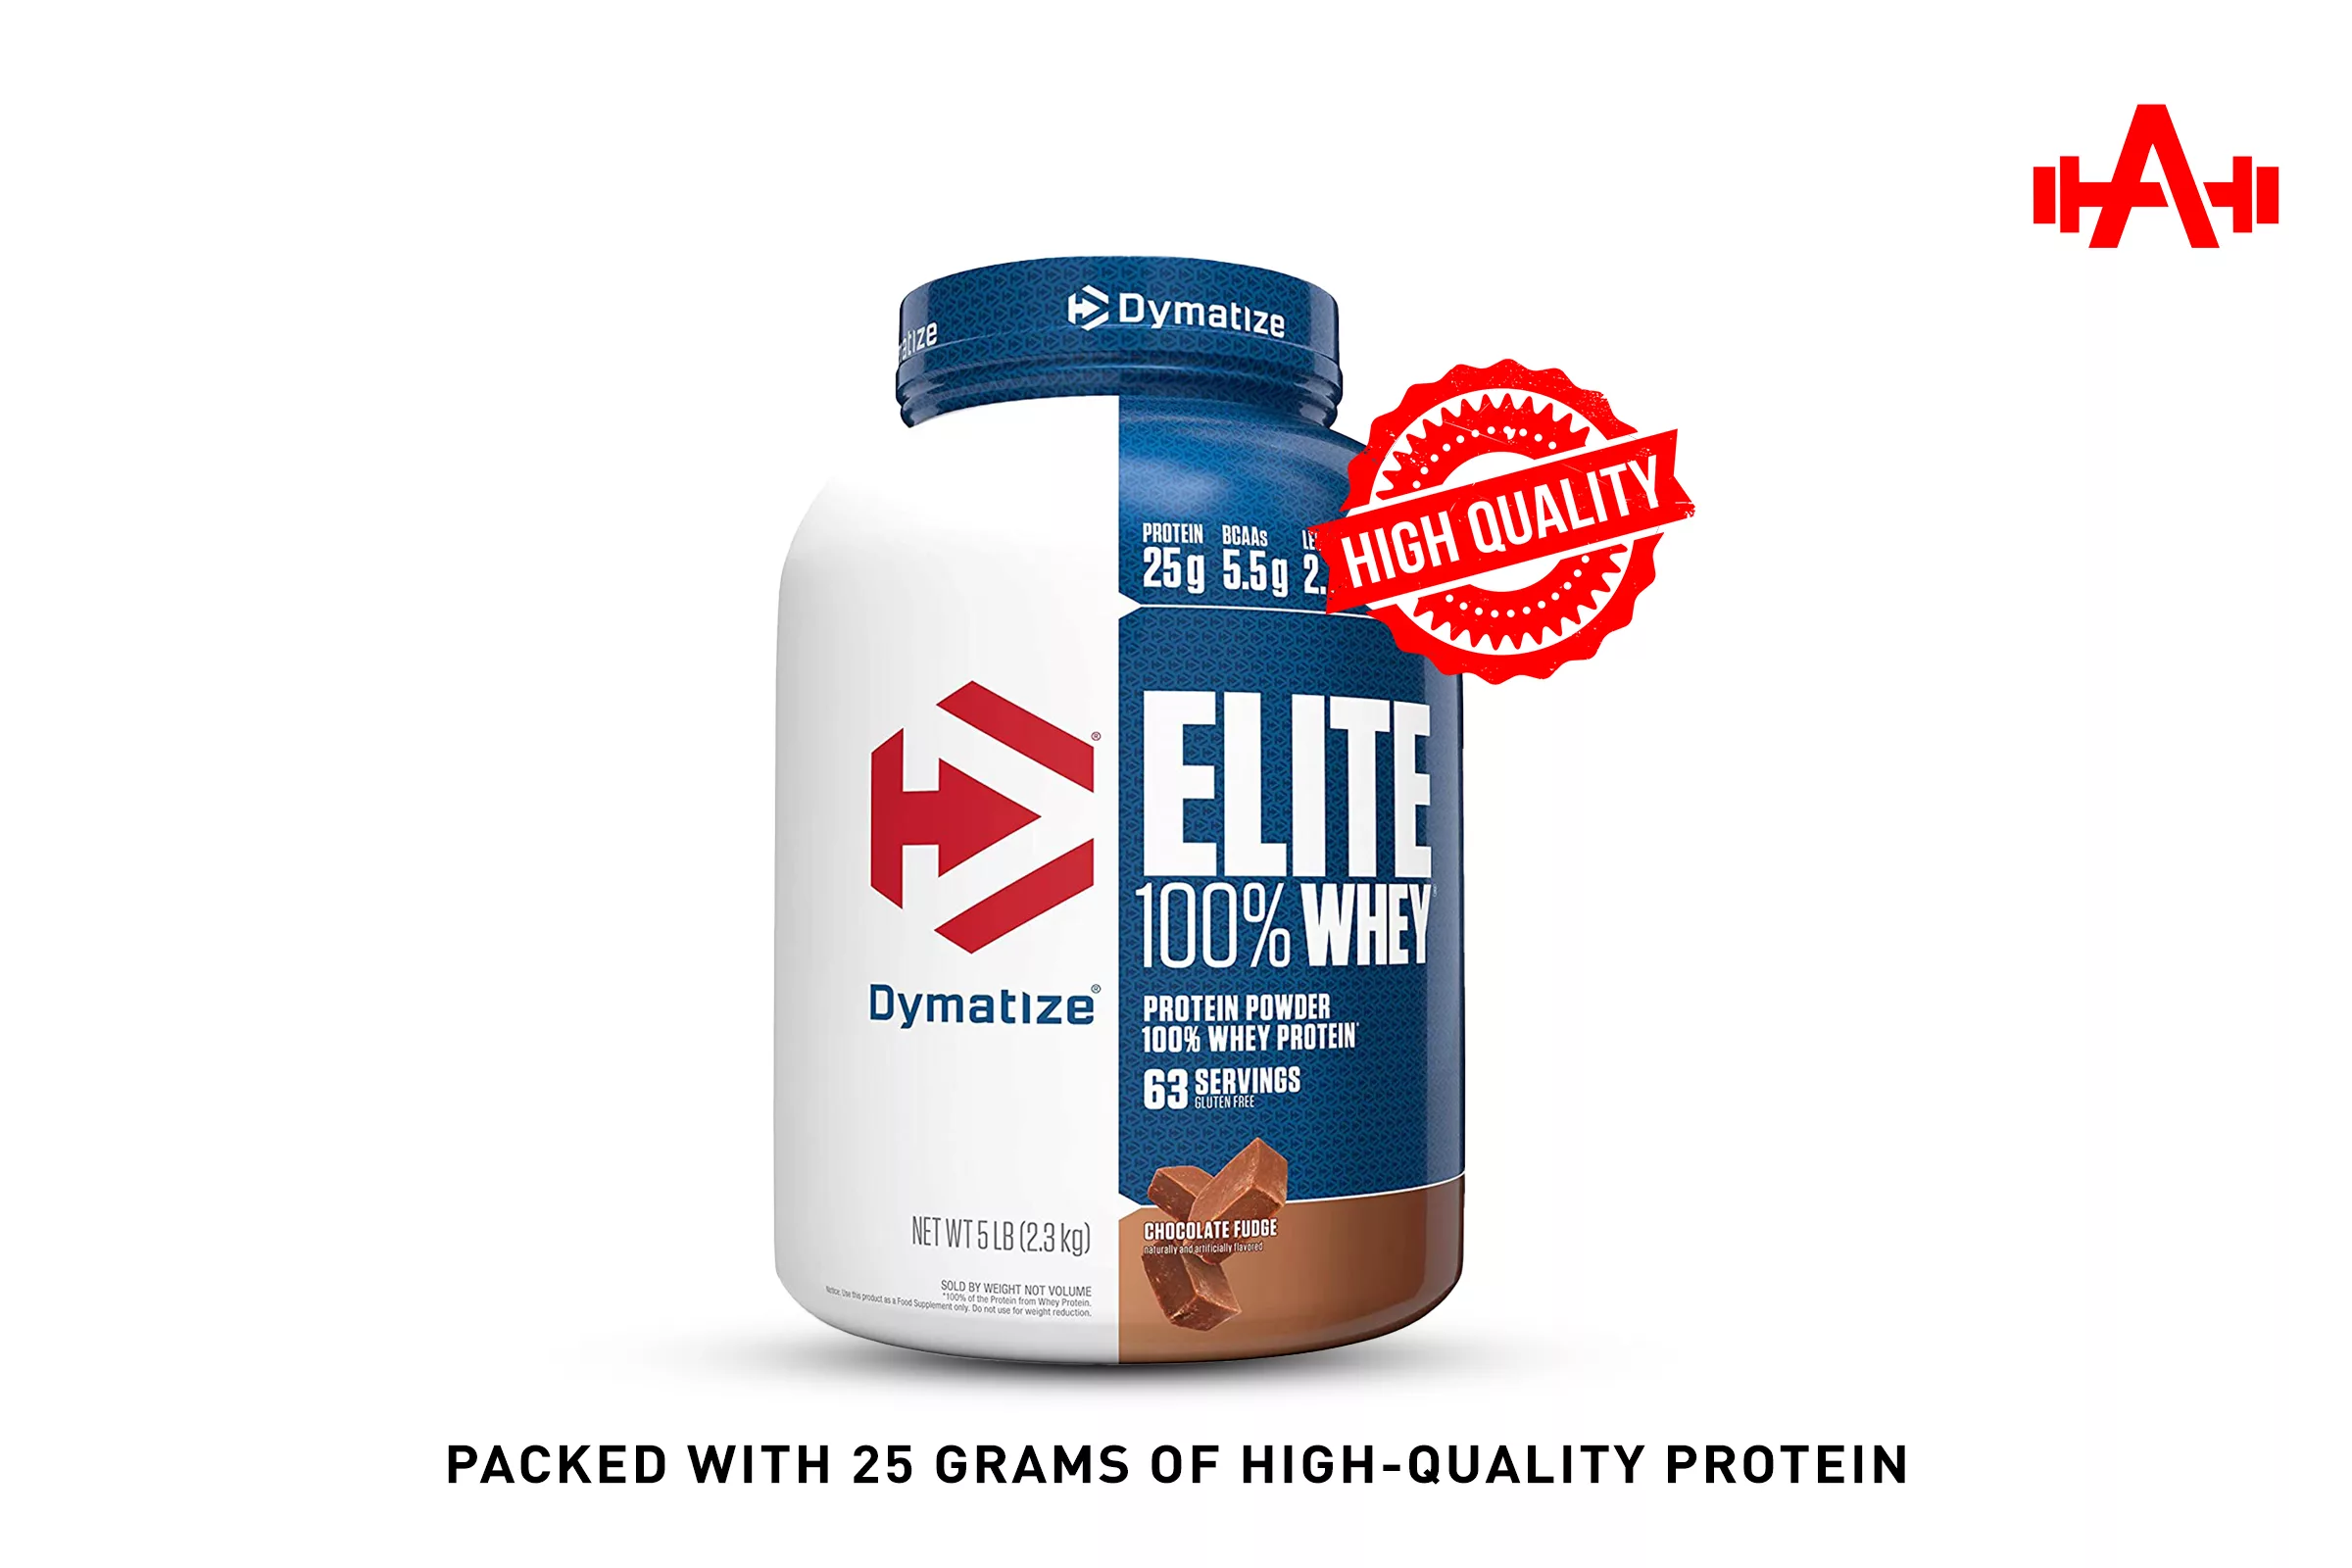 Packed with 25 grams of High-Quality Protein